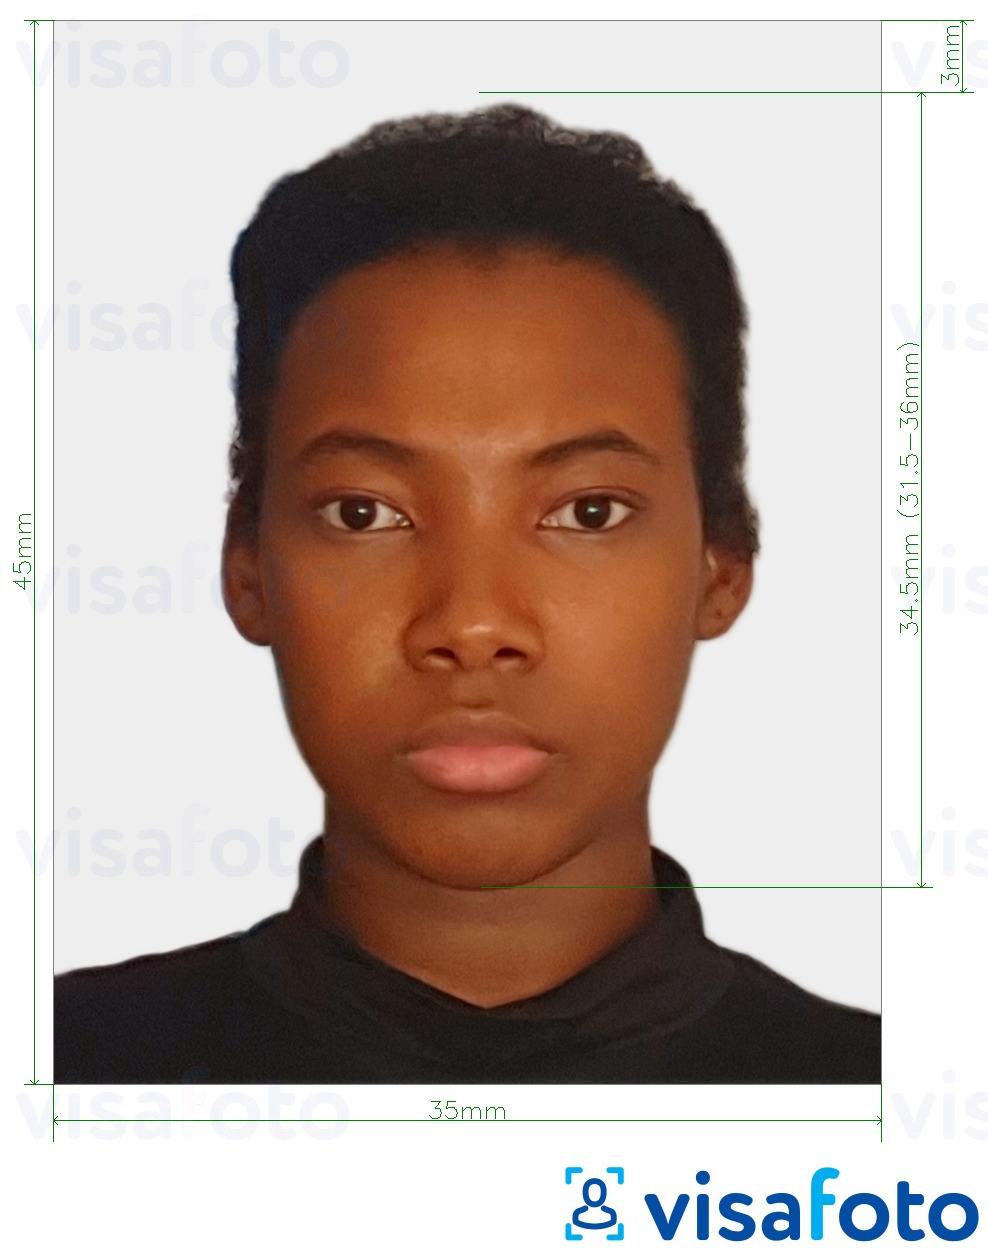 Example of photo for Cote d'Ivoire visa 4.5x3.5 cm (45x35 mm) with exact size specification